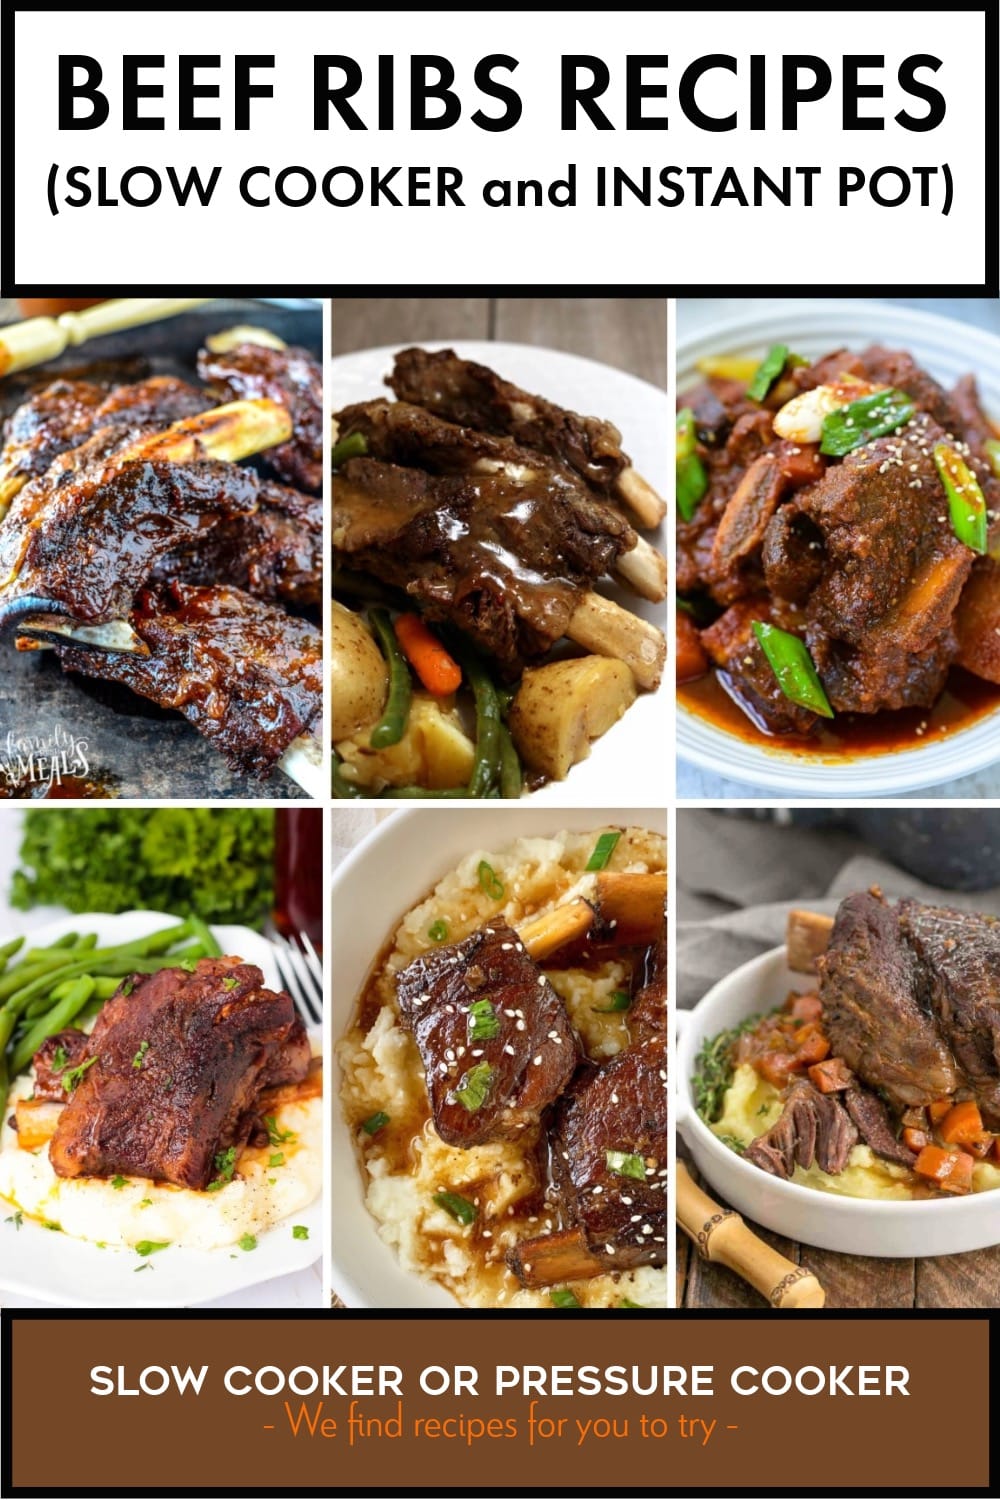 Pinterest image of Beef Ribs Recipes (Slow Cooker and Instant Pot)